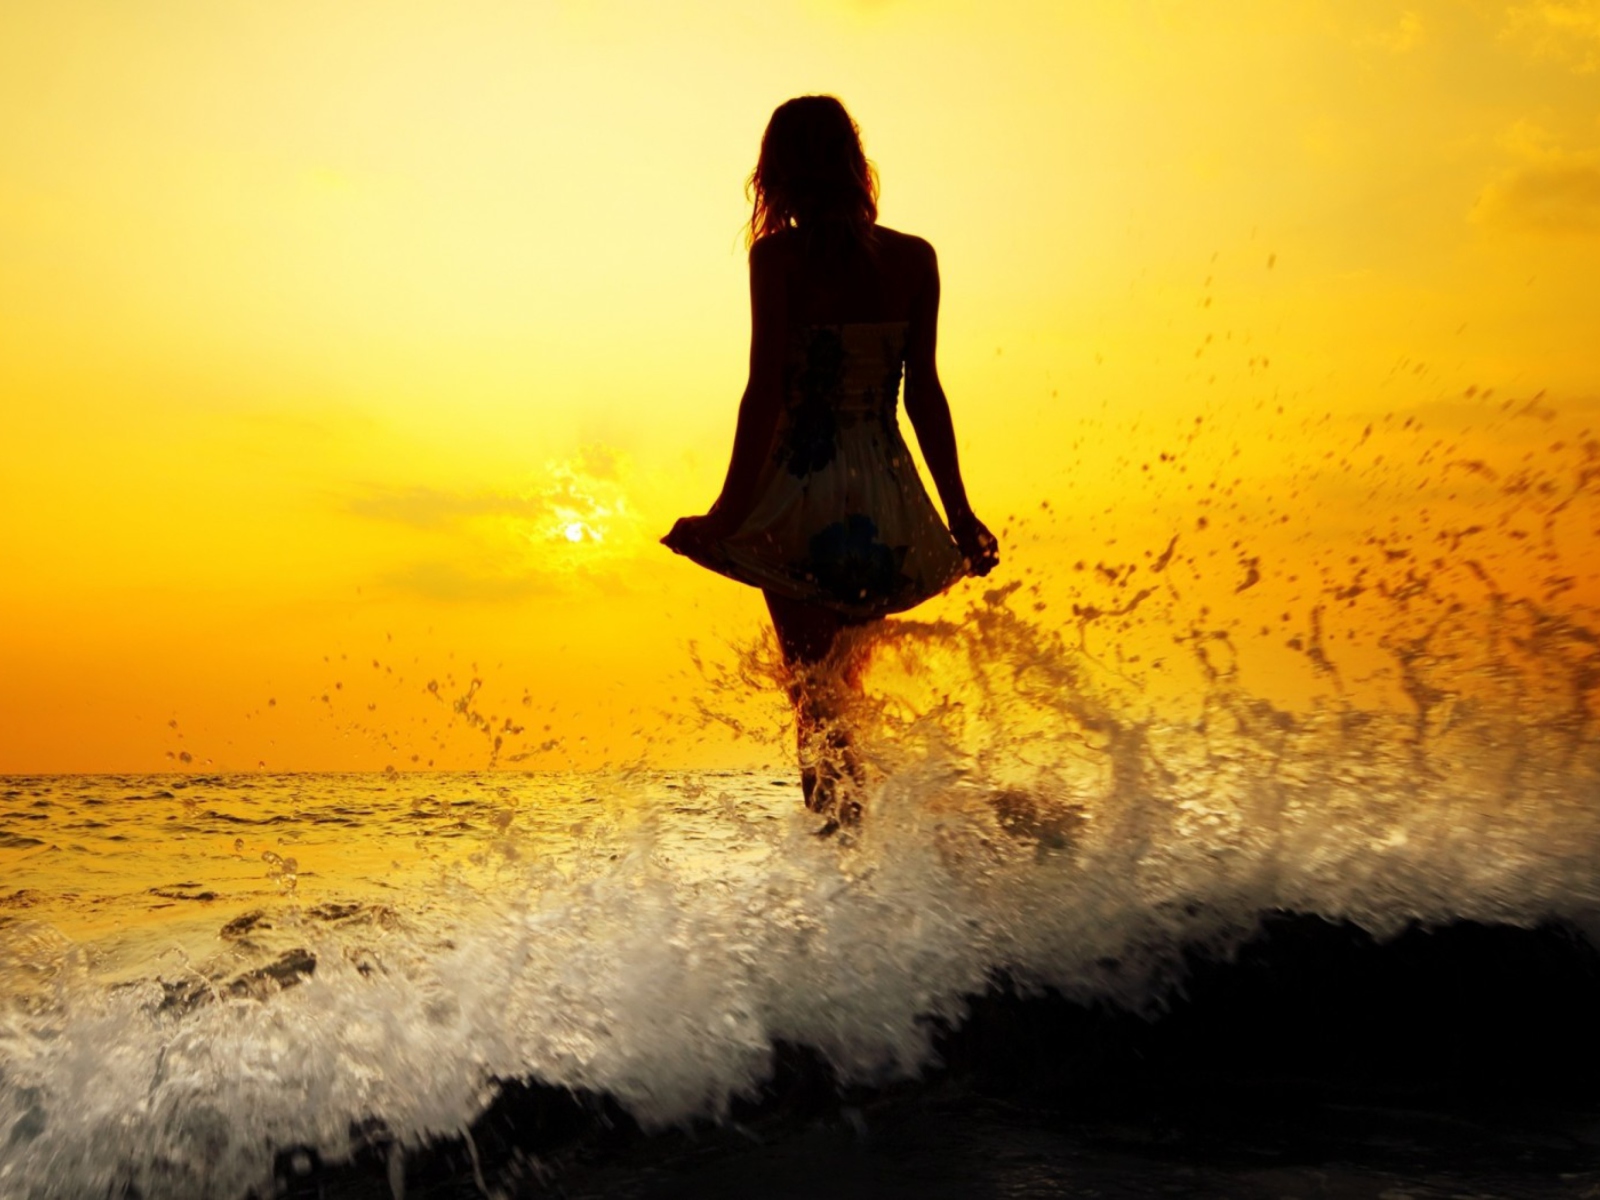 Girl Silhouette In Sea Waves At Sunset wallpaper 1600x1200